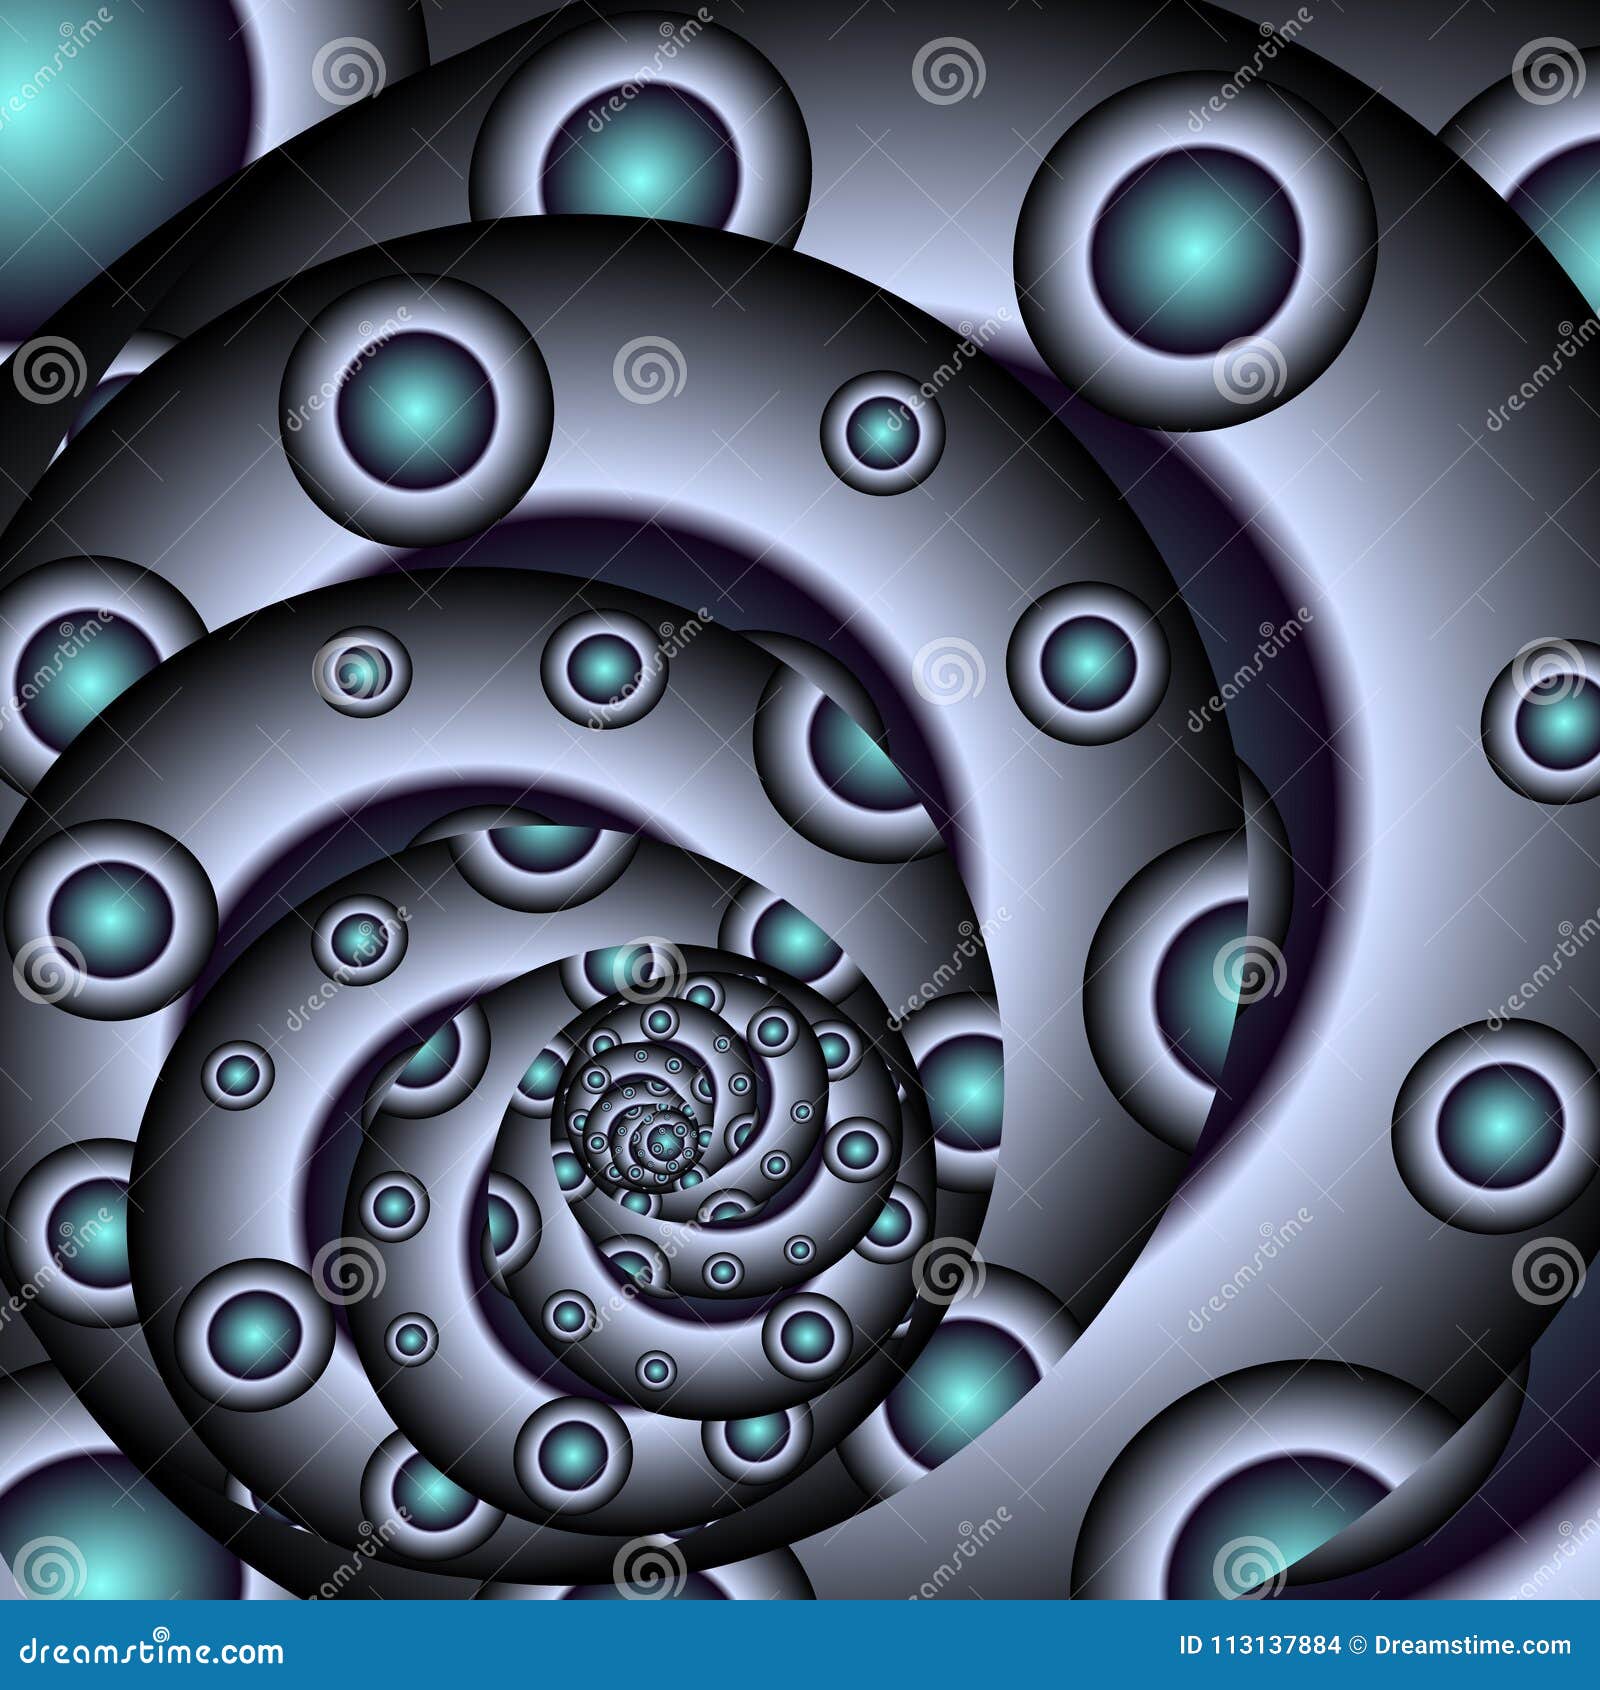 Abstract Computer Generated Fractal Design. a Fractal is a Never